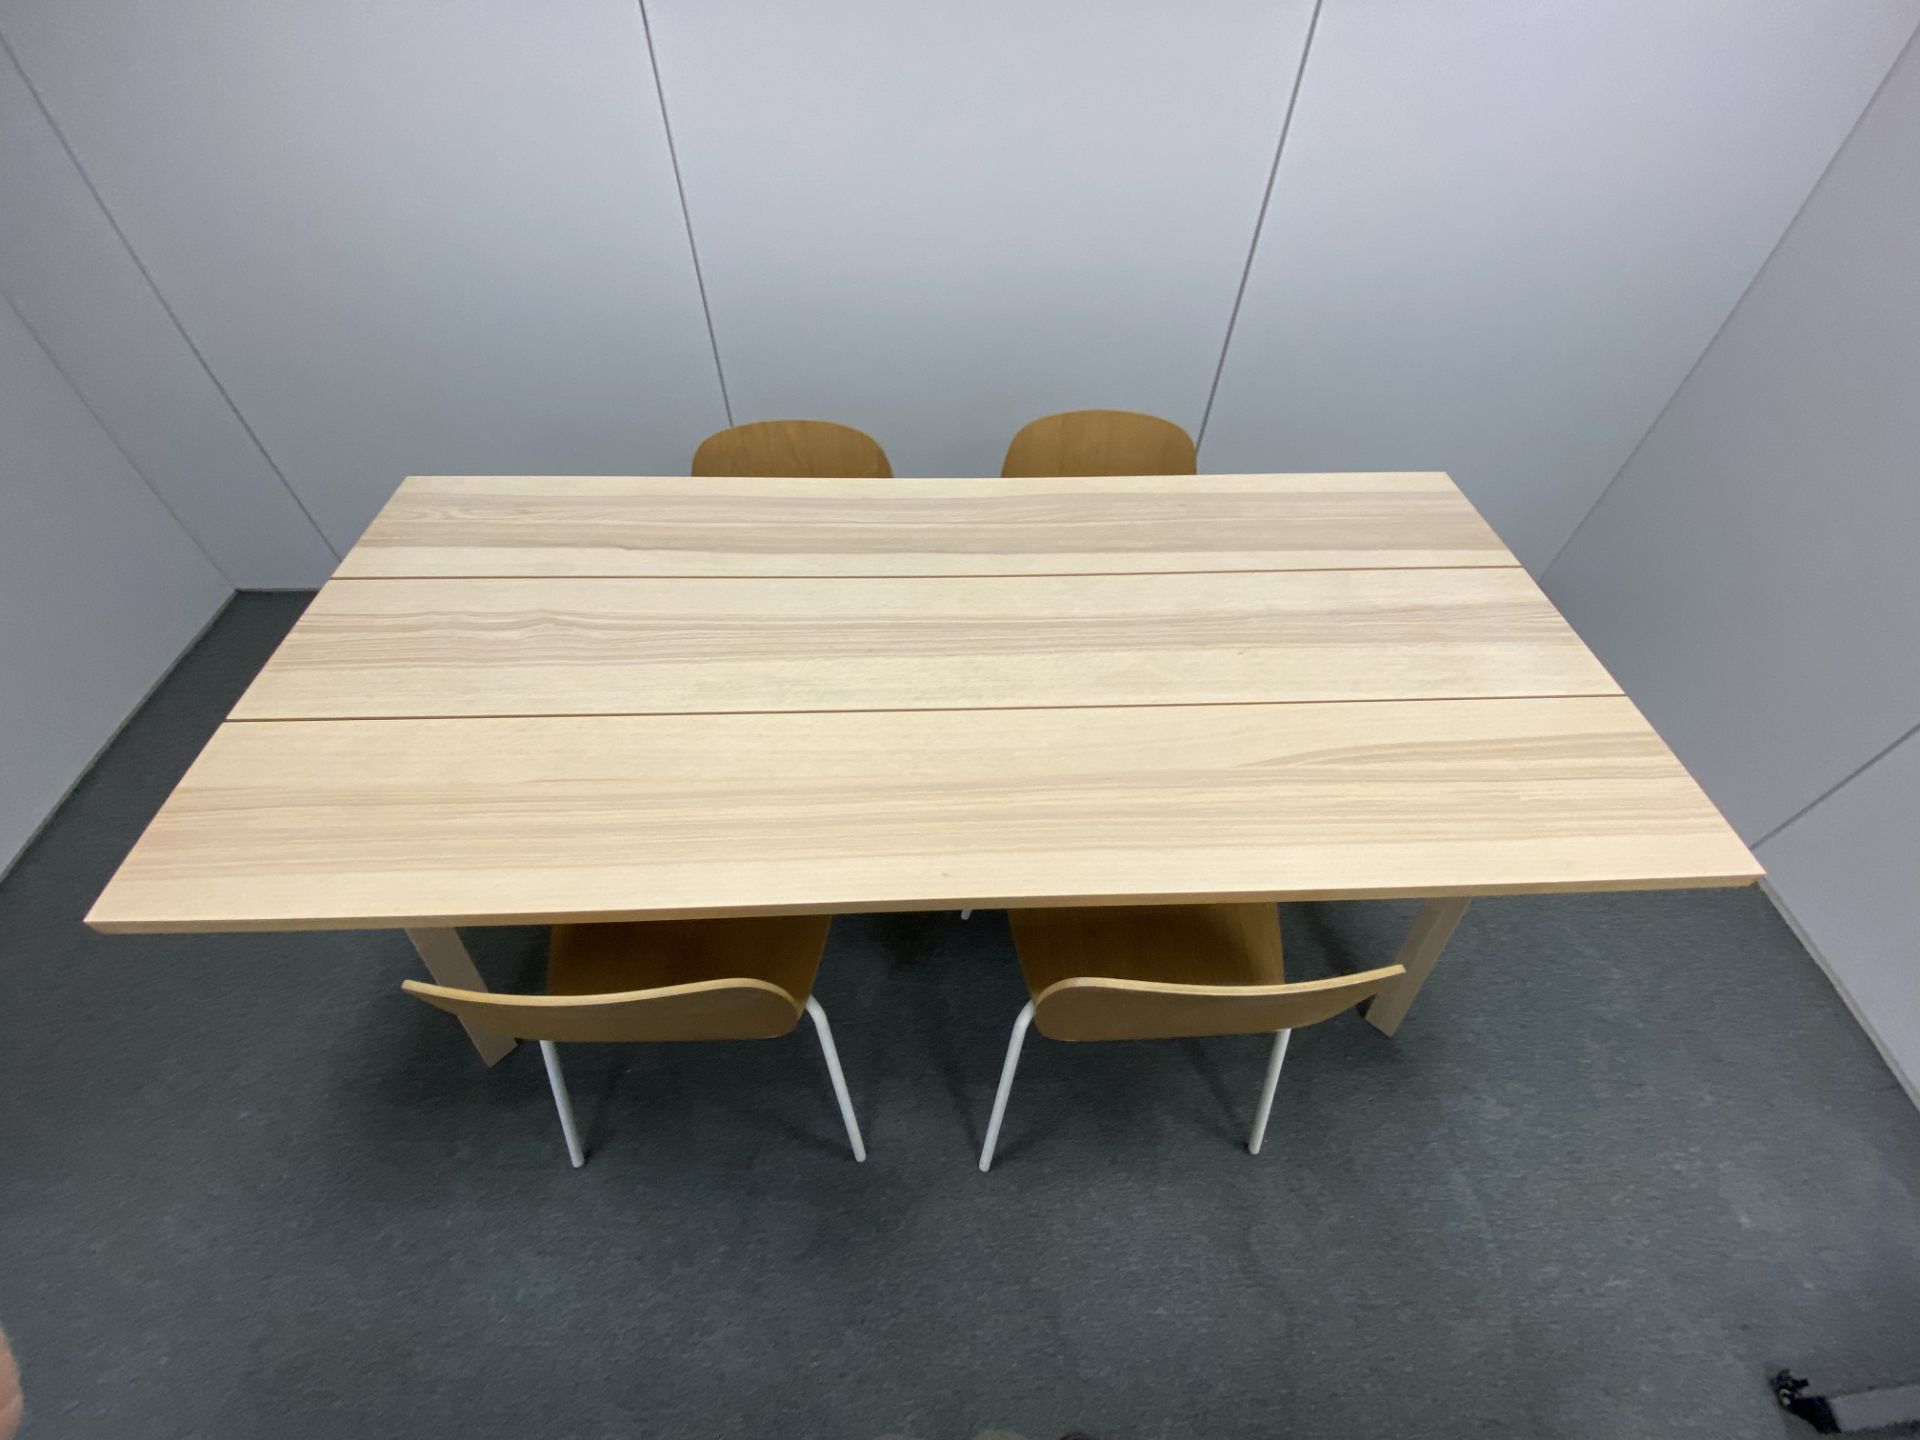 Lot comprisng: a meeting table and four chairs - Image 2 of 3